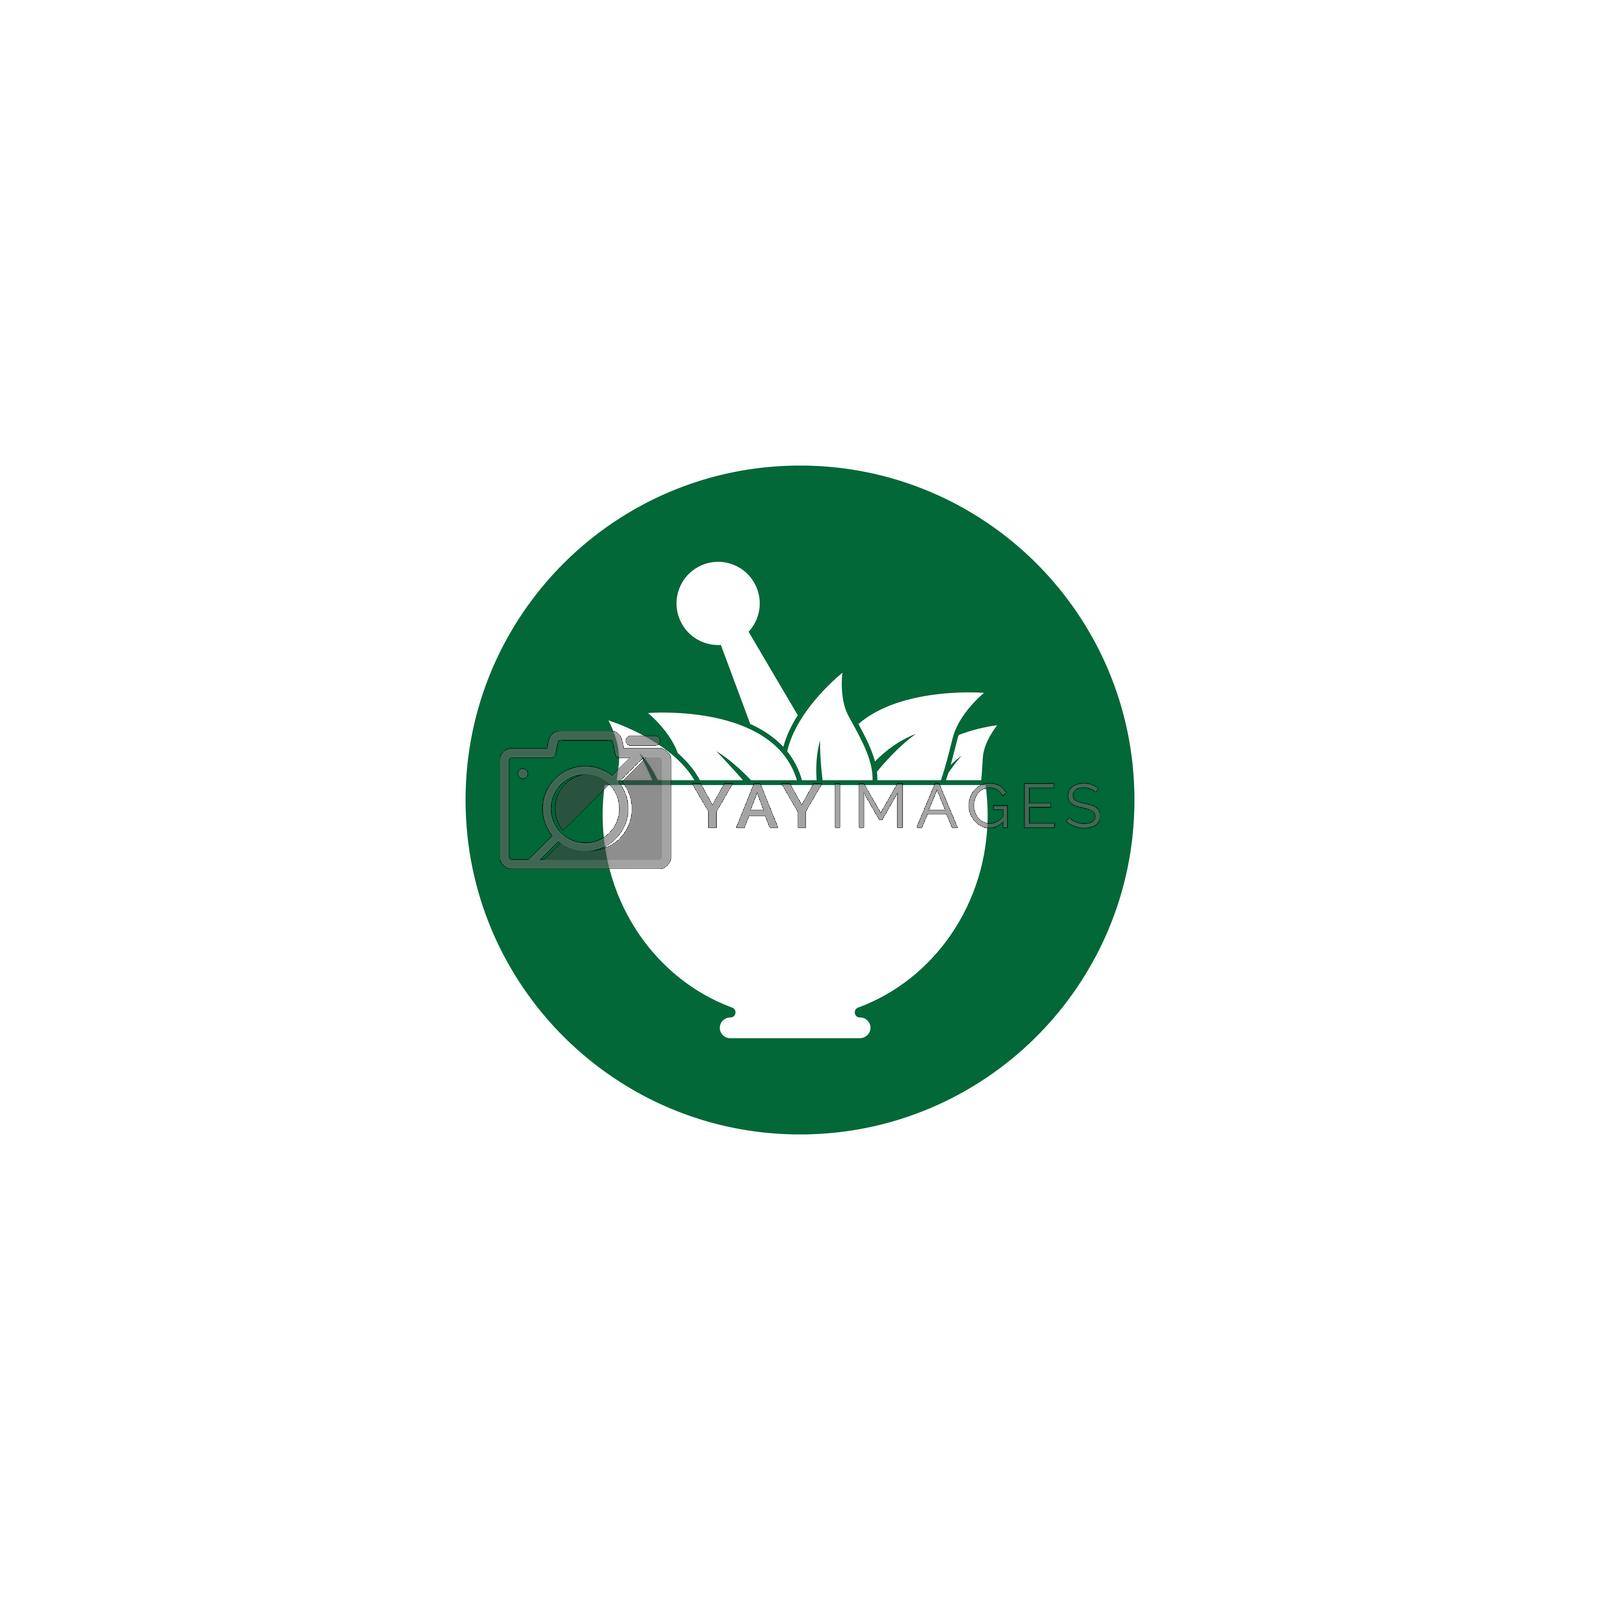 Royalty free image of Herbal medicine logo template vector icon by Attades19